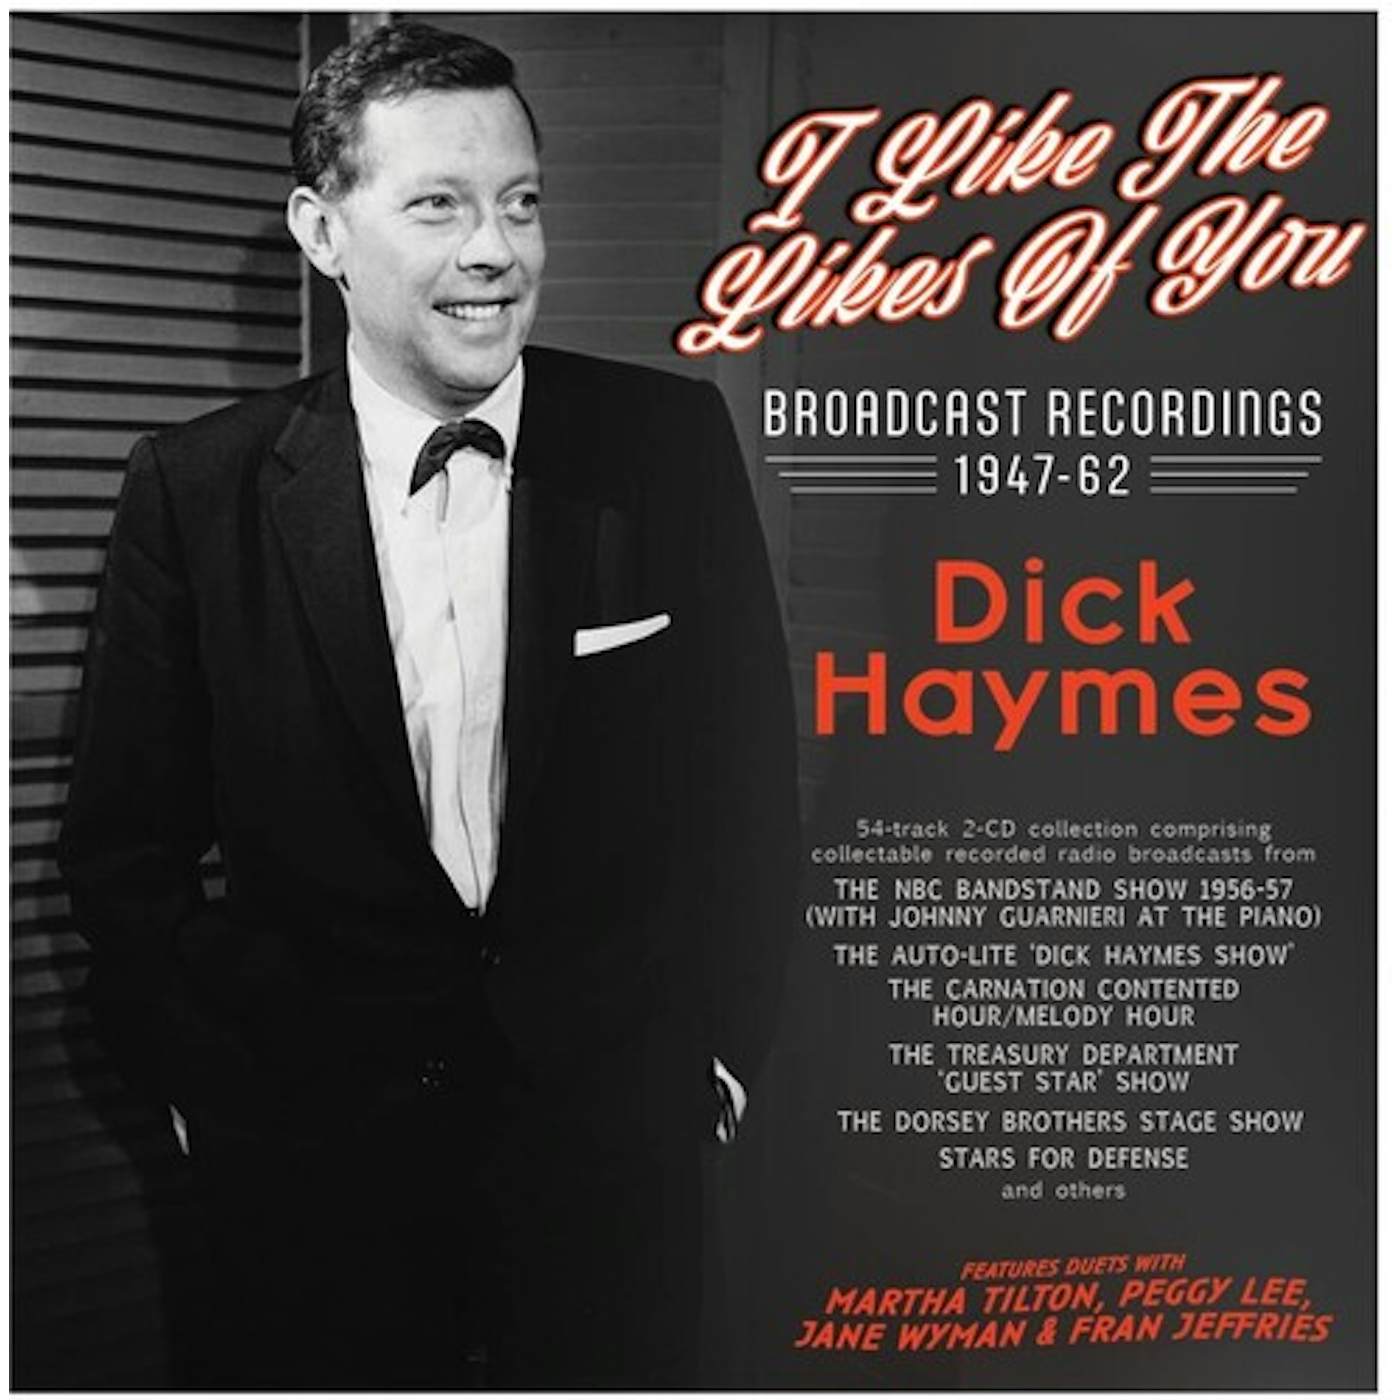 Dick Haymes I LIKE THE LIKES OF YOU: BROADCAST RECORDINGS CD